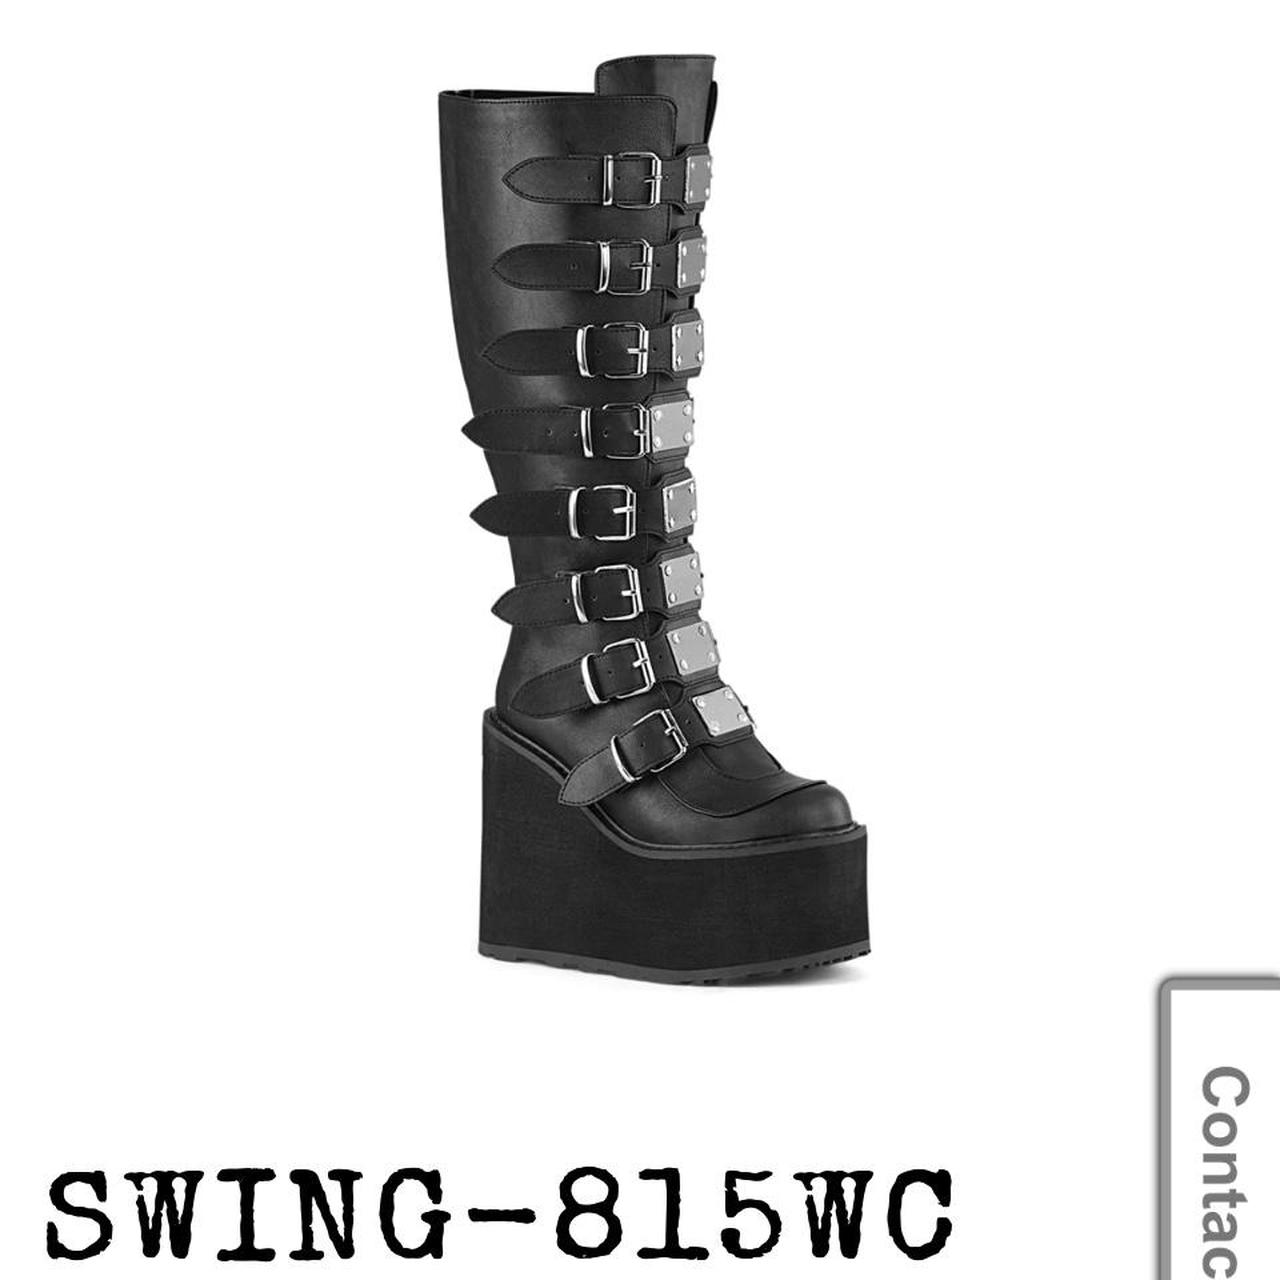 Product Image 1 - size 7 demonia swing boots
only